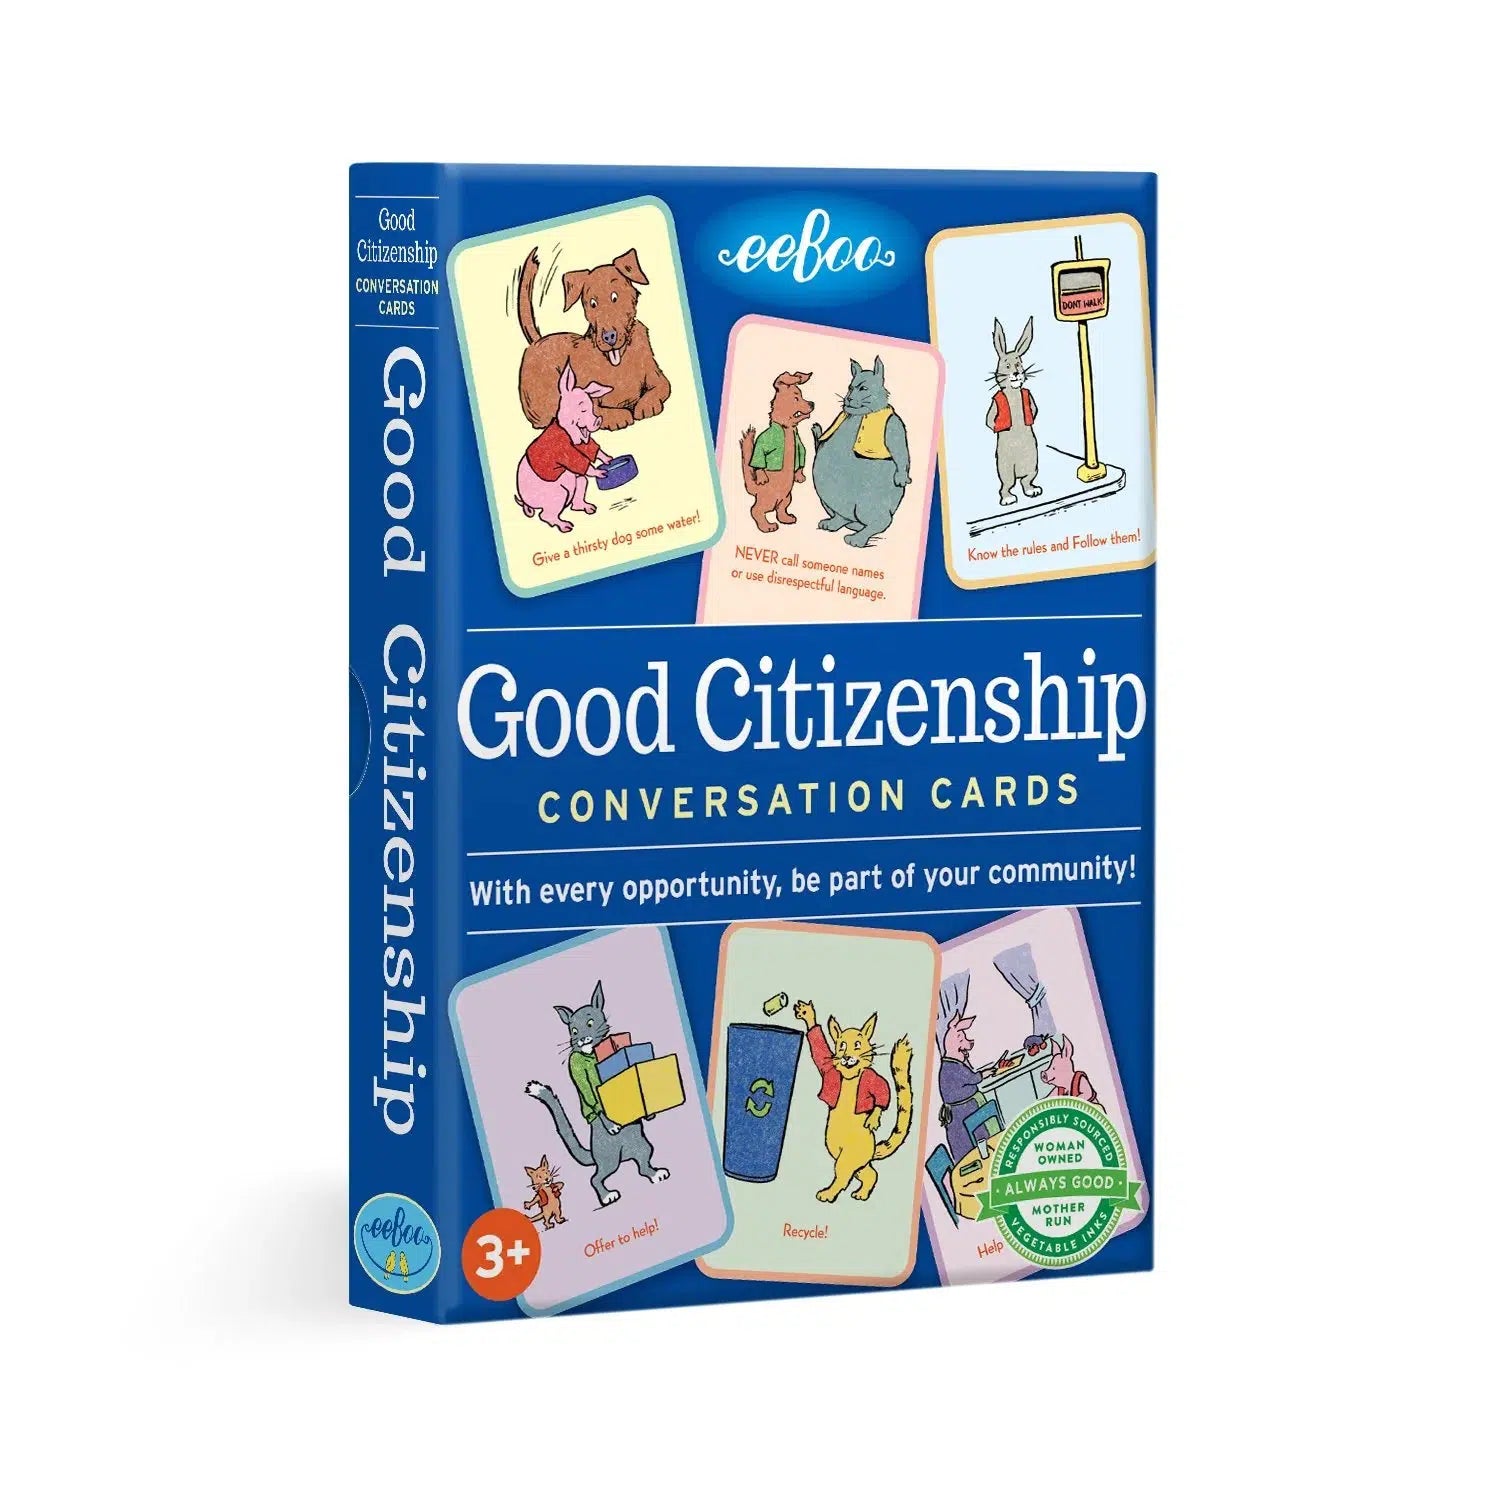 Front view of the Good Citizenship Conversation Cards in their box.